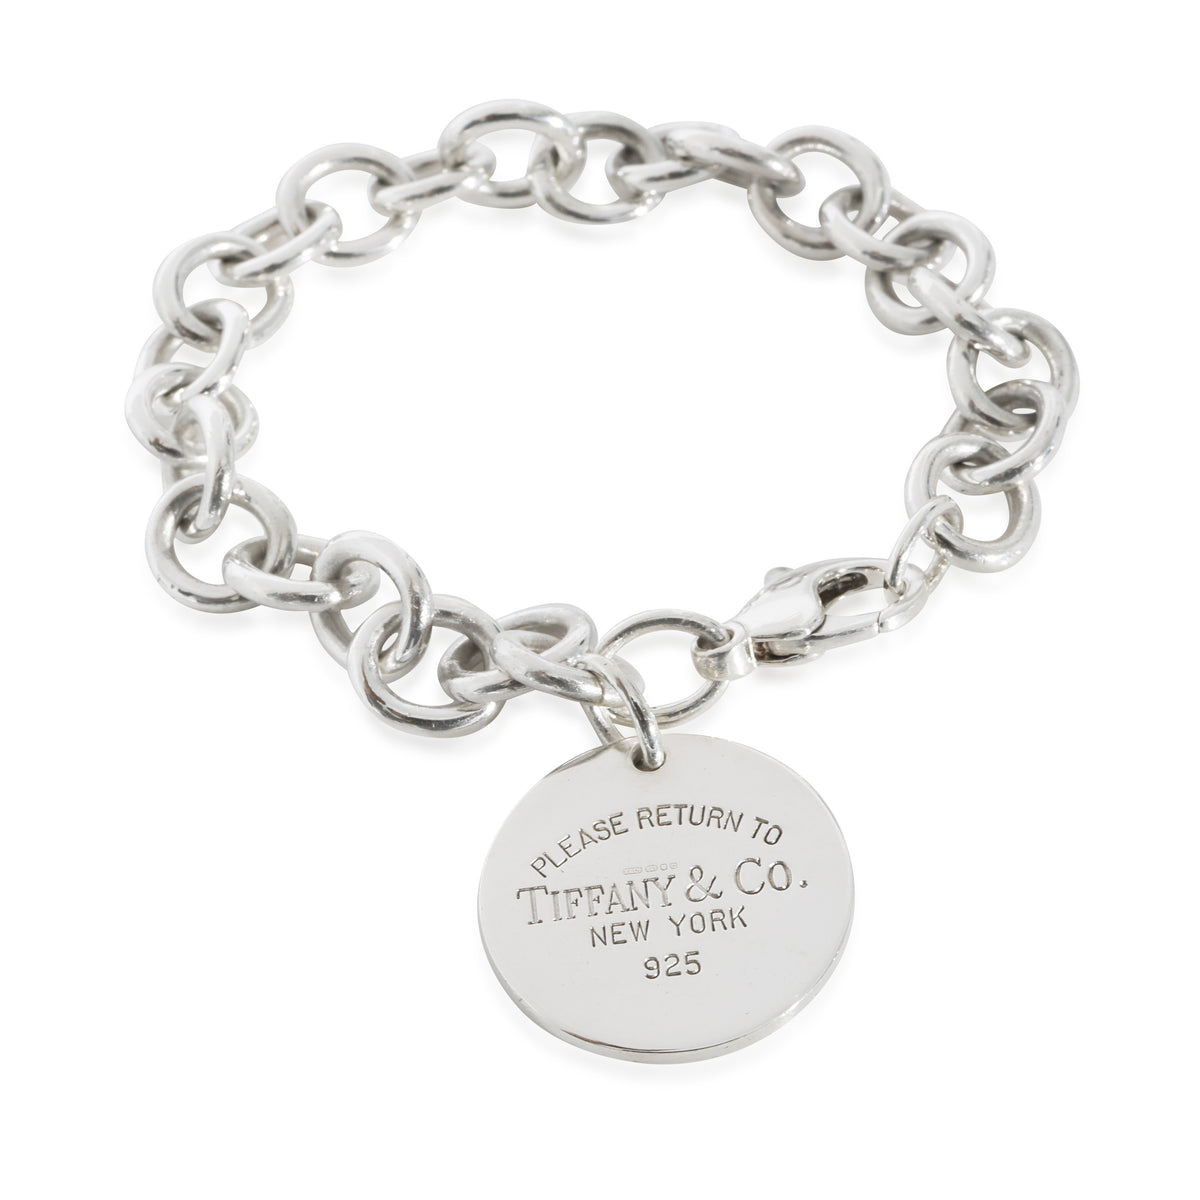 Tiffany & Co. Return To Tiffany Round Tag Bracelet in  Sterling Silver